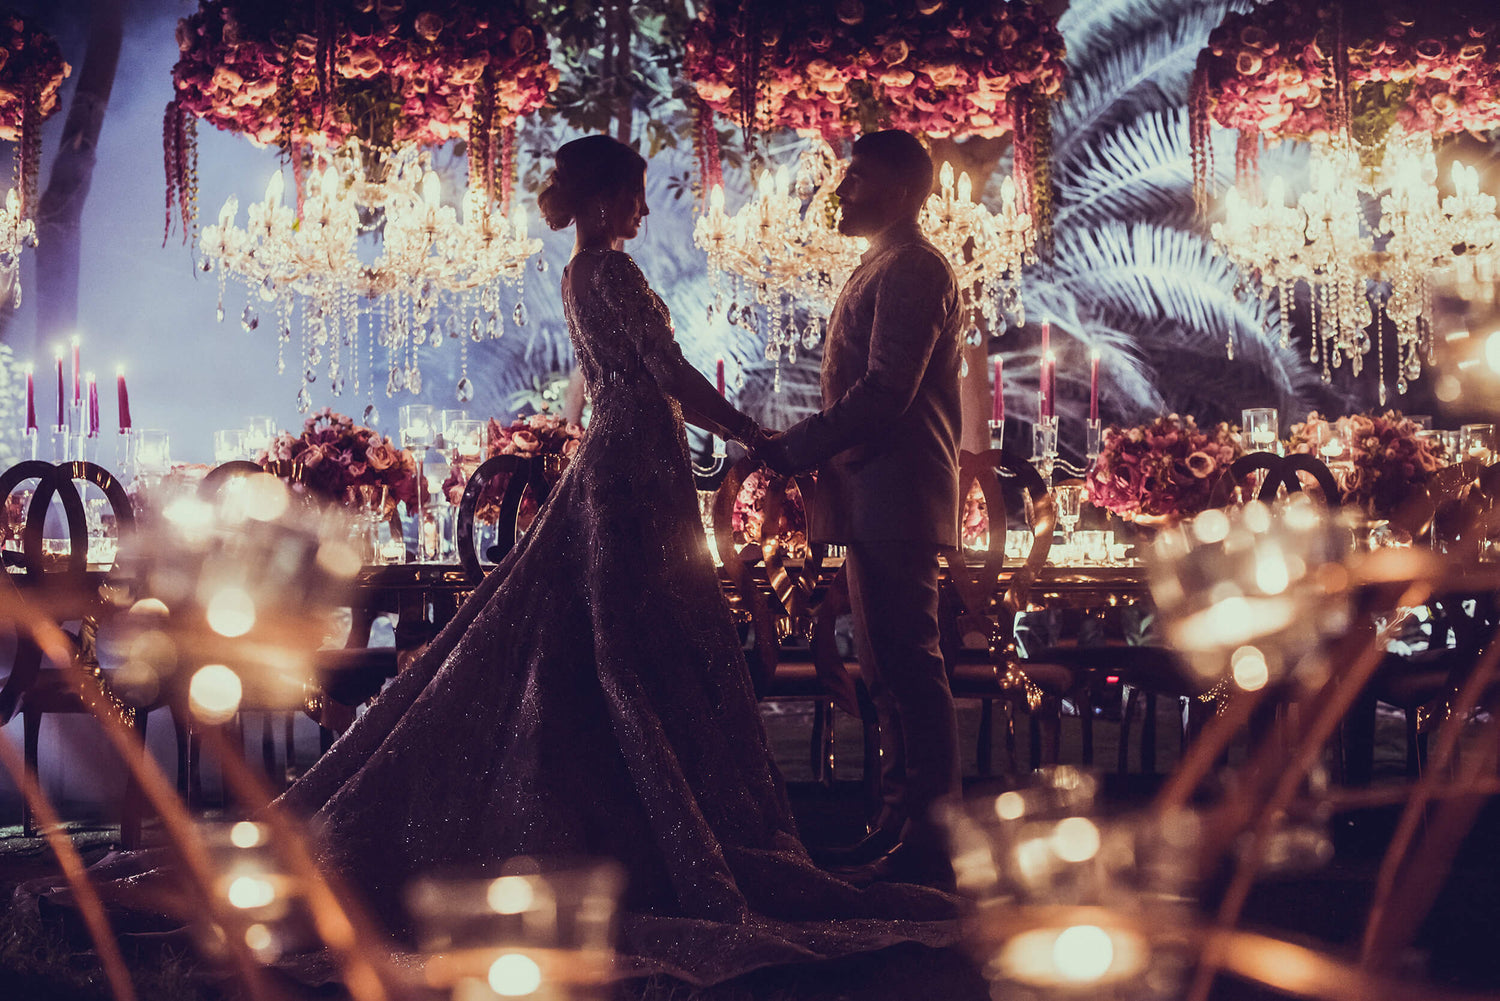 We understand that a wedding is a deeply personal and meaningful occasion. It is our privilege to be entrusted with bringing our clients’ visions to life and exceeding their expectations through immersive and transformative experiences.